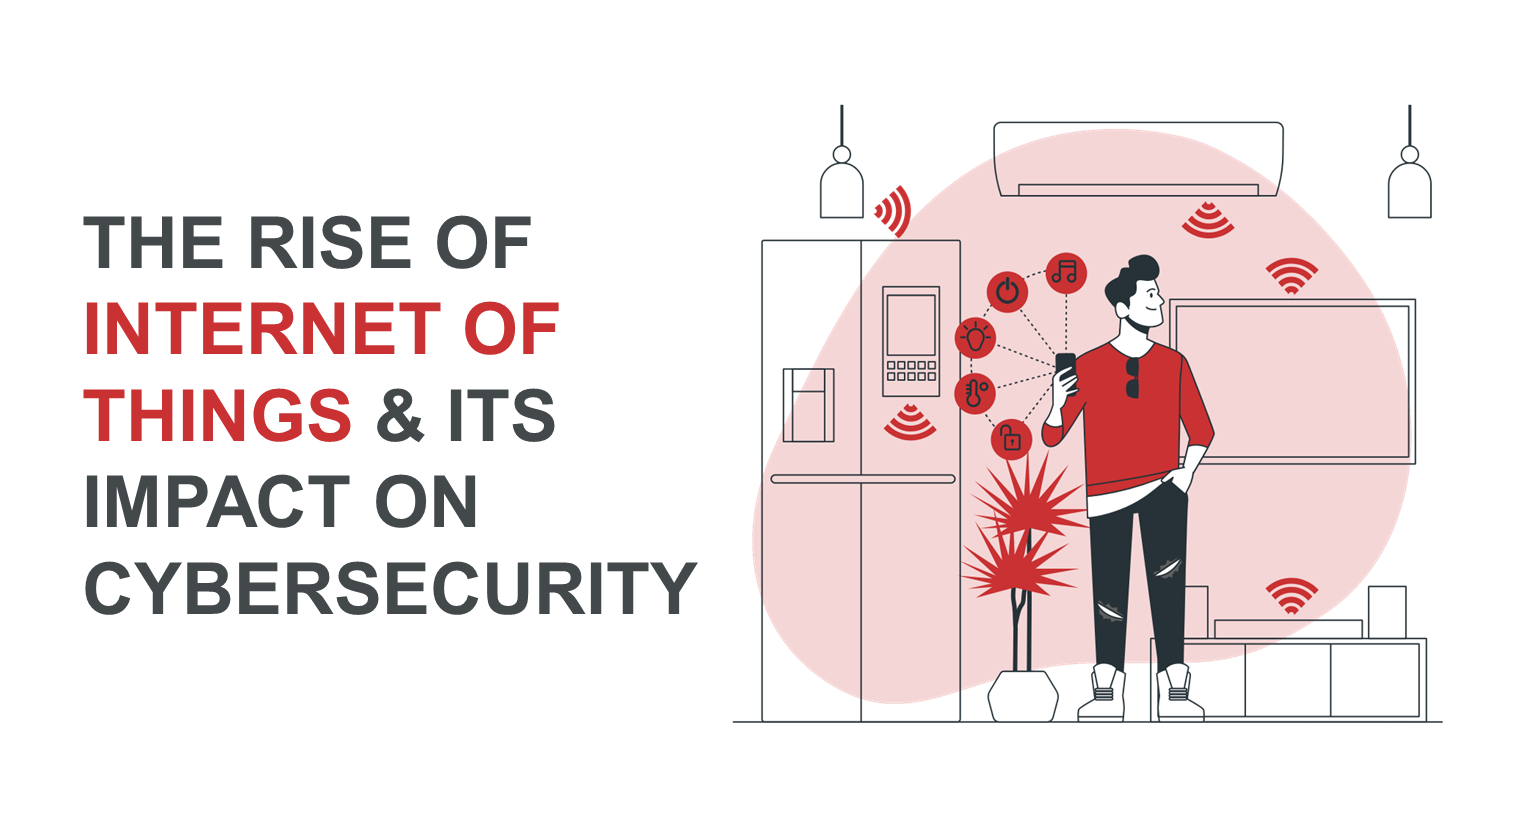 The Rise of Internet of Things and Its Impact on Cybersecurity